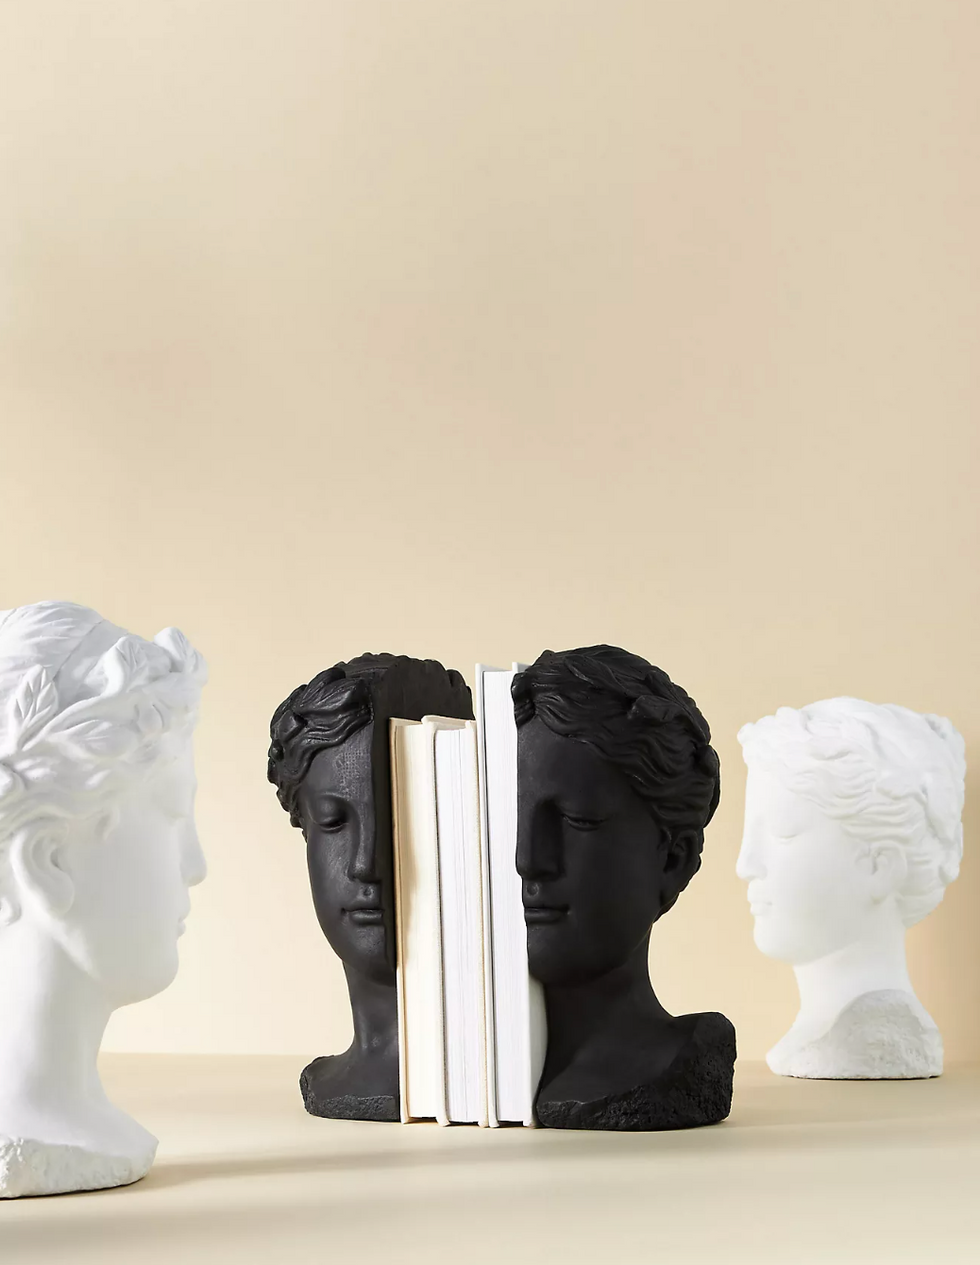 Anthropologie Grecian Bust Bookends